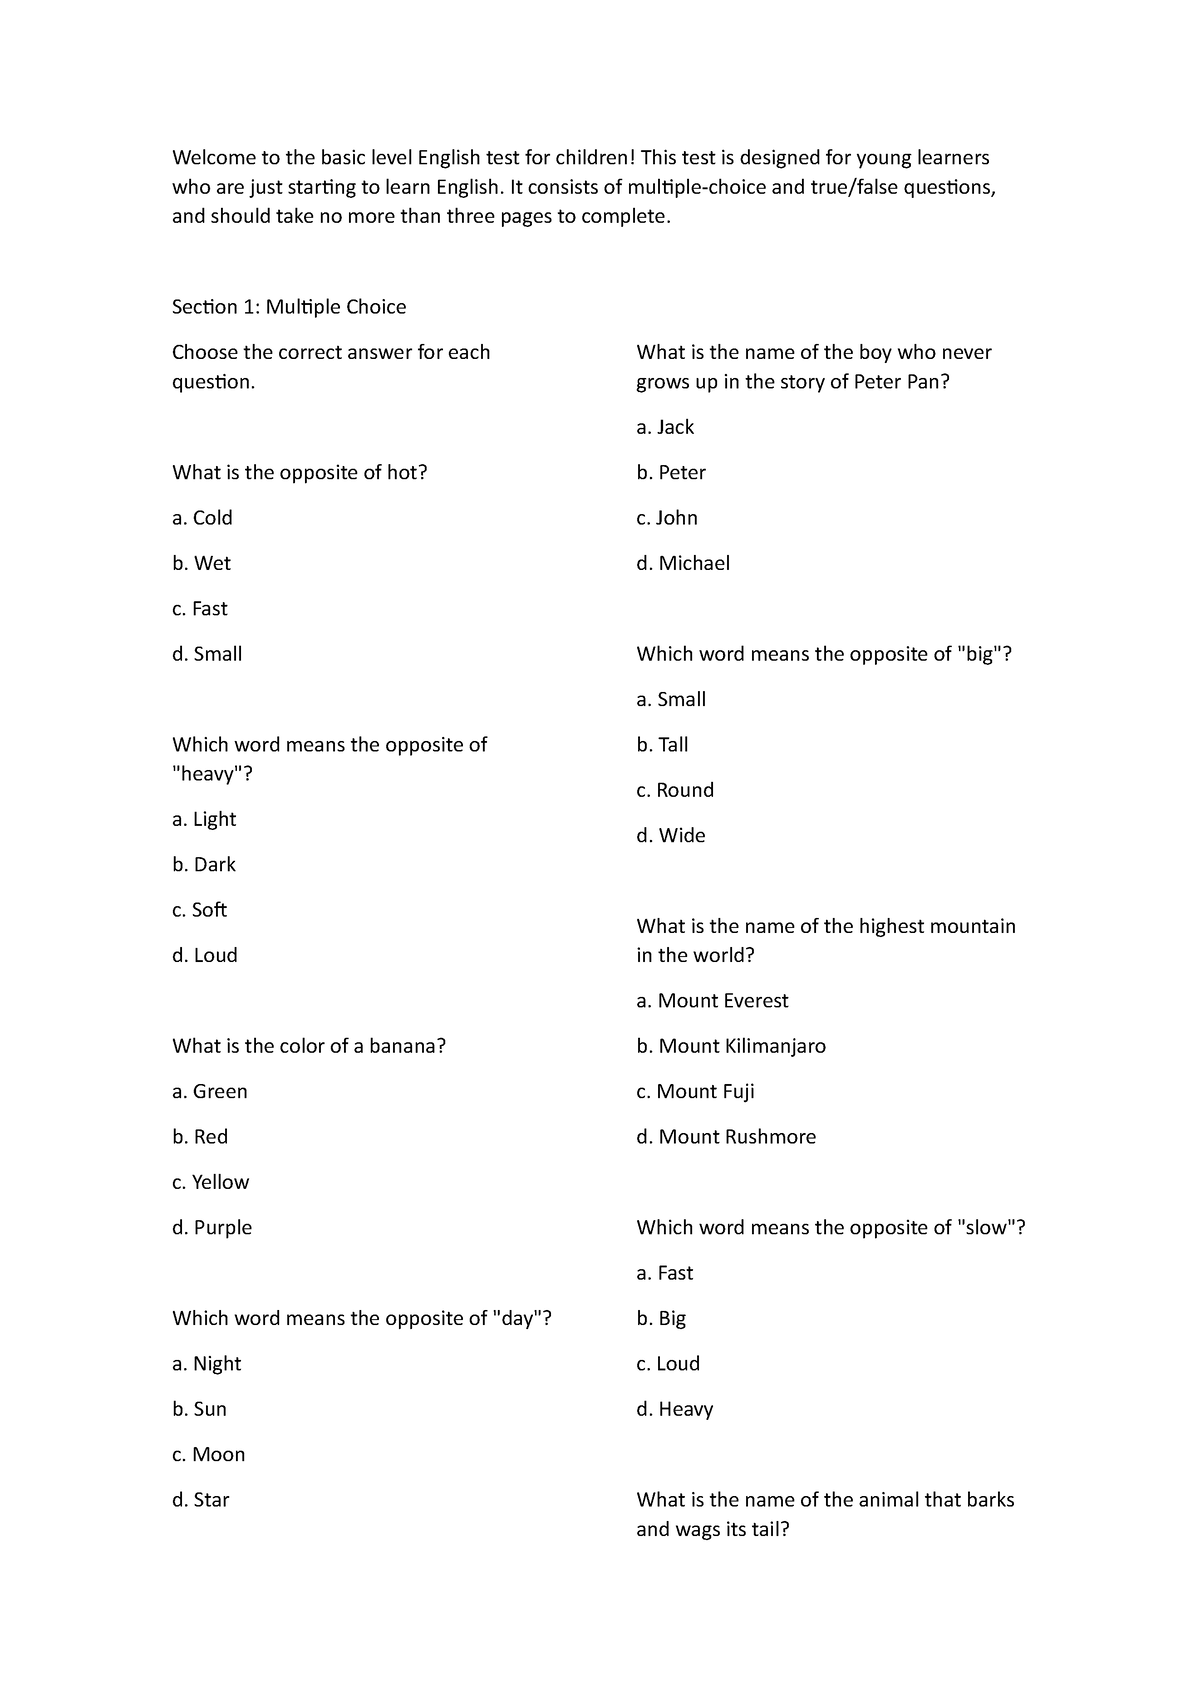 test-english-ingles-welcome-to-the-basic-level-english-test-for